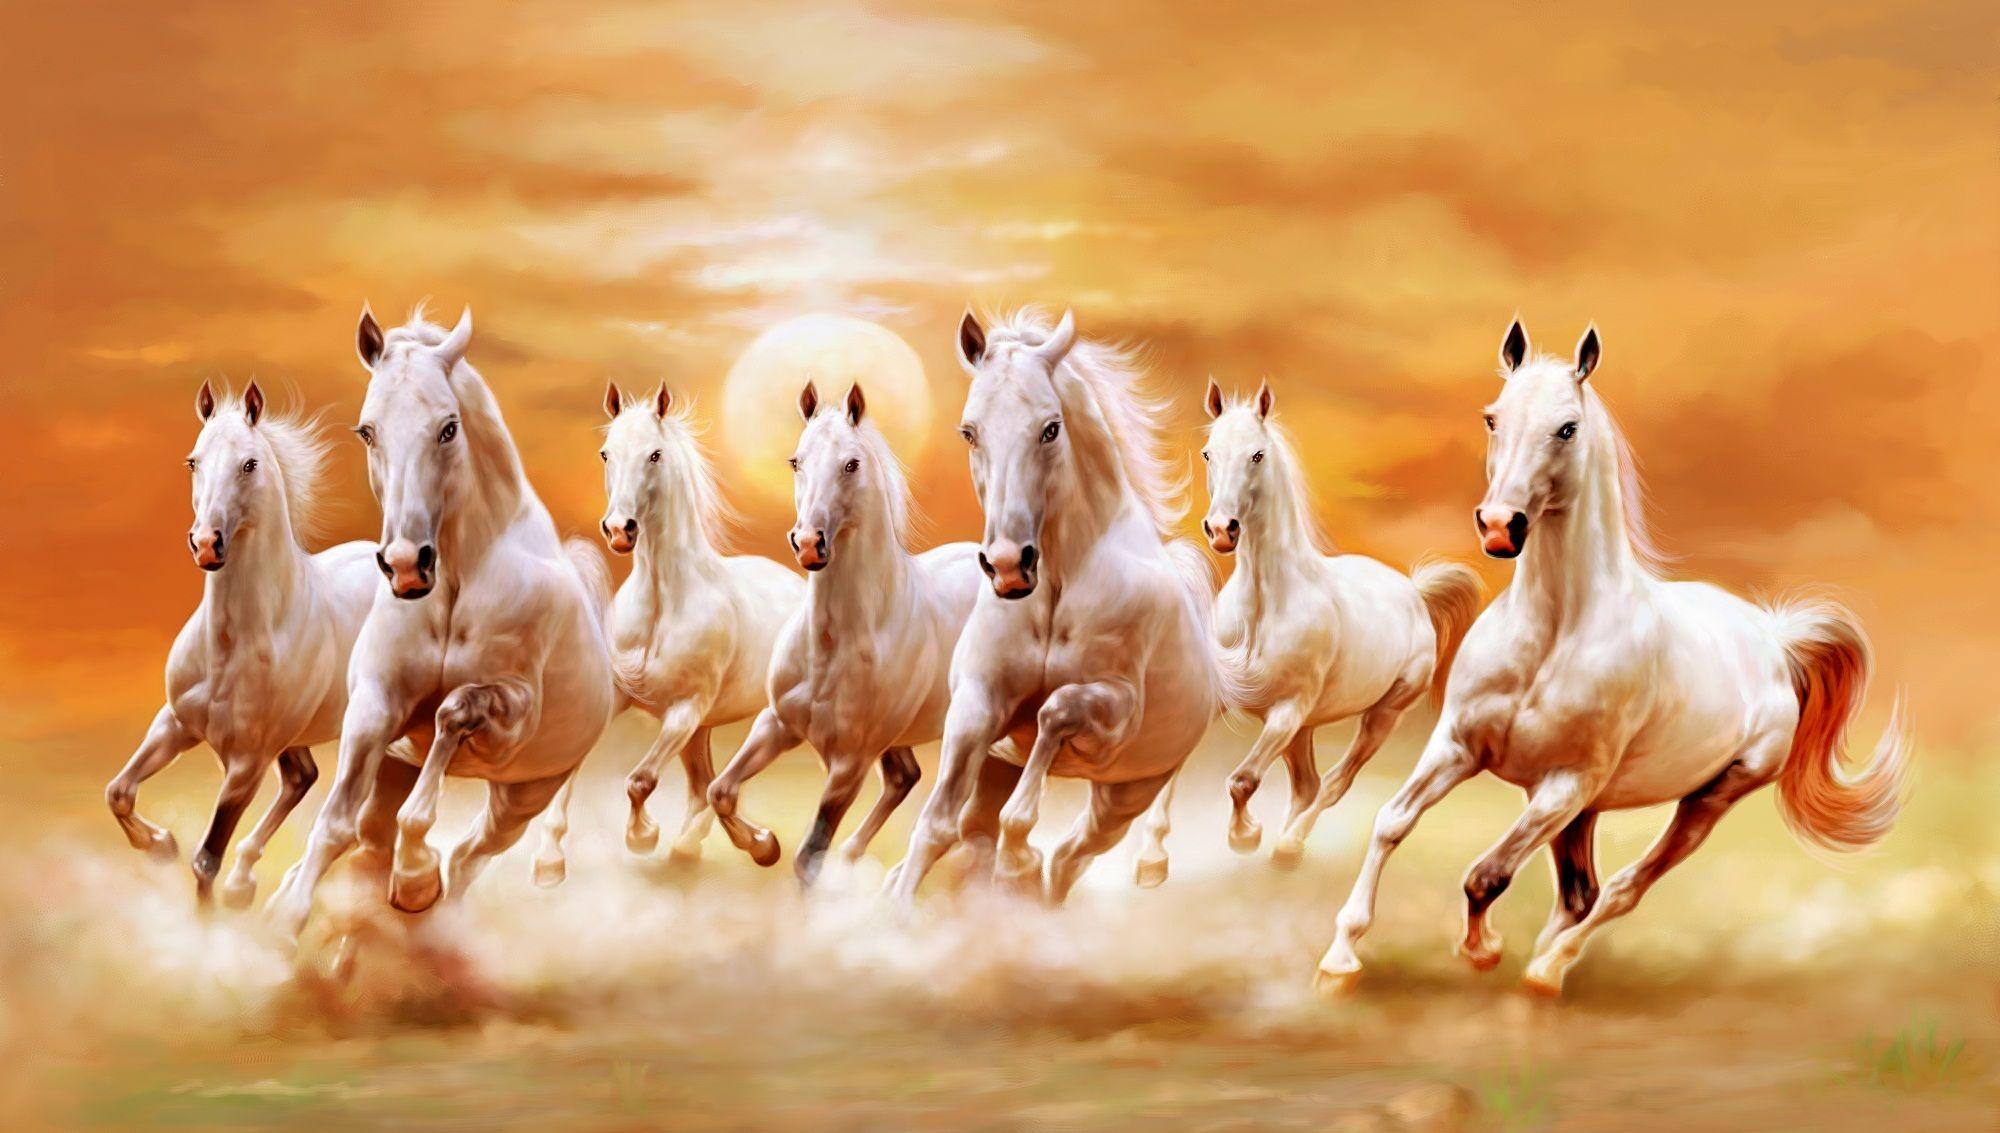 Vastu Seven Horse Painting at Best Prices Online Shopping Store. Seven horses painting, Horse wallpaper, Horse canvas painting